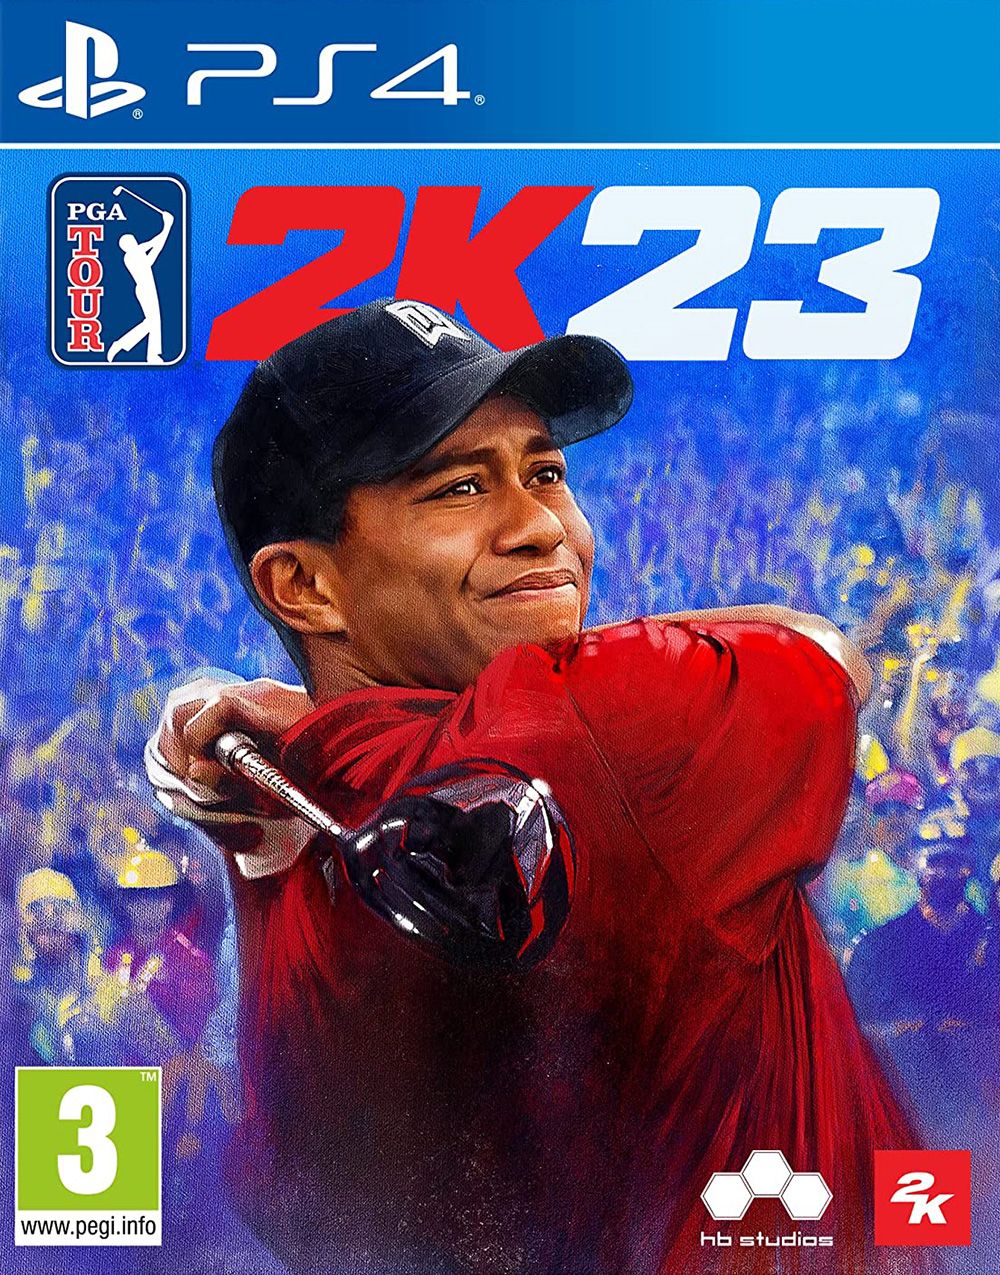 PGA Tour 2K23 (PS4)(New) Buy from Pwned Games with confidence. PS4